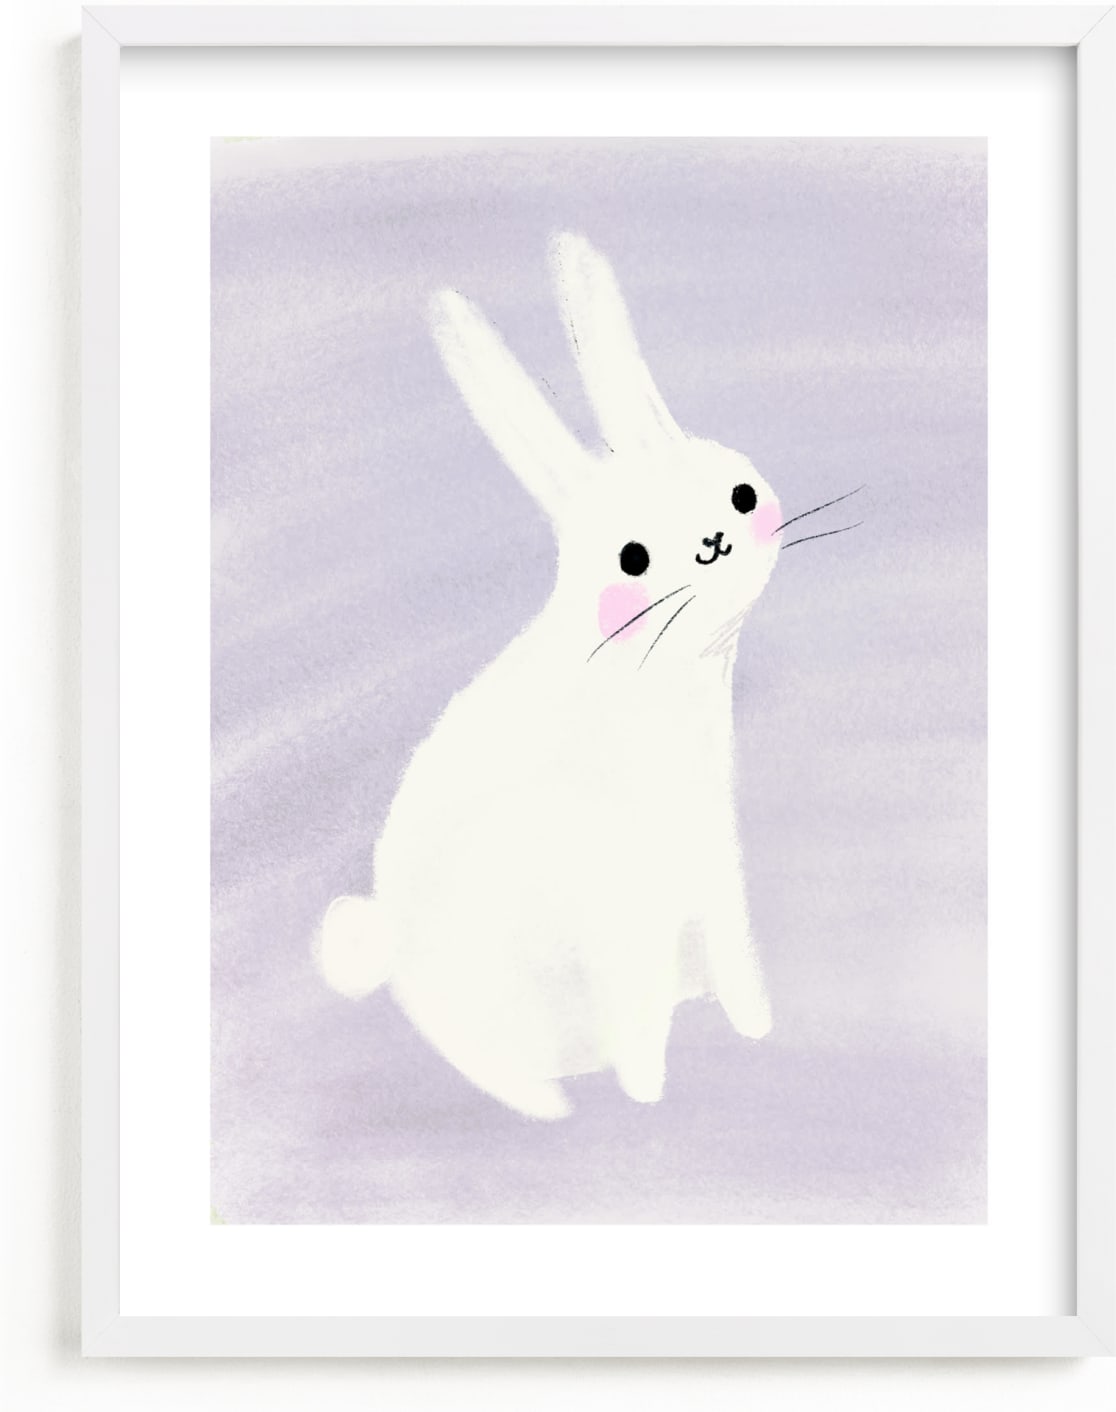 This is a purple nursery wall art by Lori Wemple called Happy Bunny.